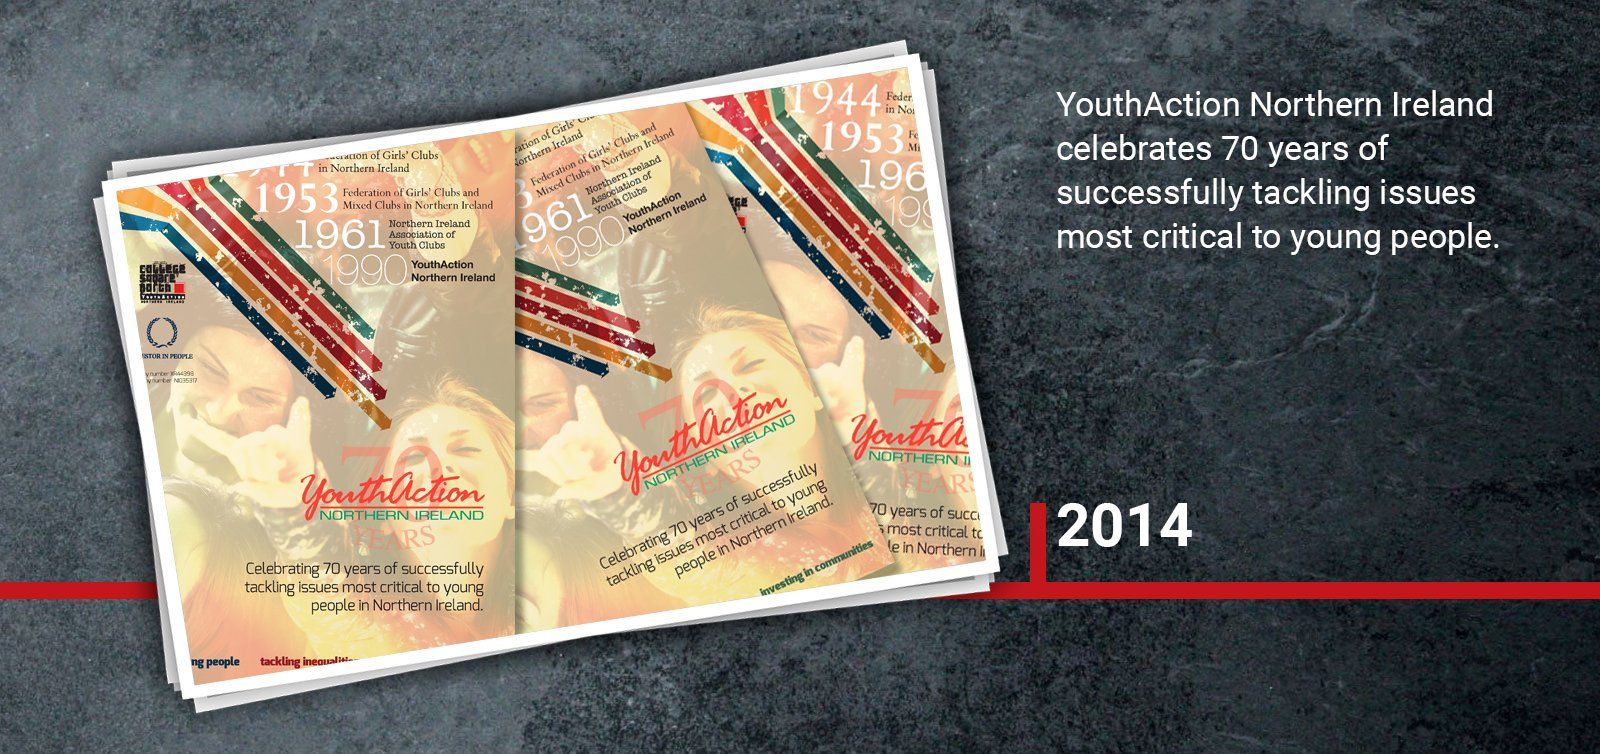 2014 YouthAction Northern Ireland celebrates 70 years of successfully tackling issues most critical to young people.